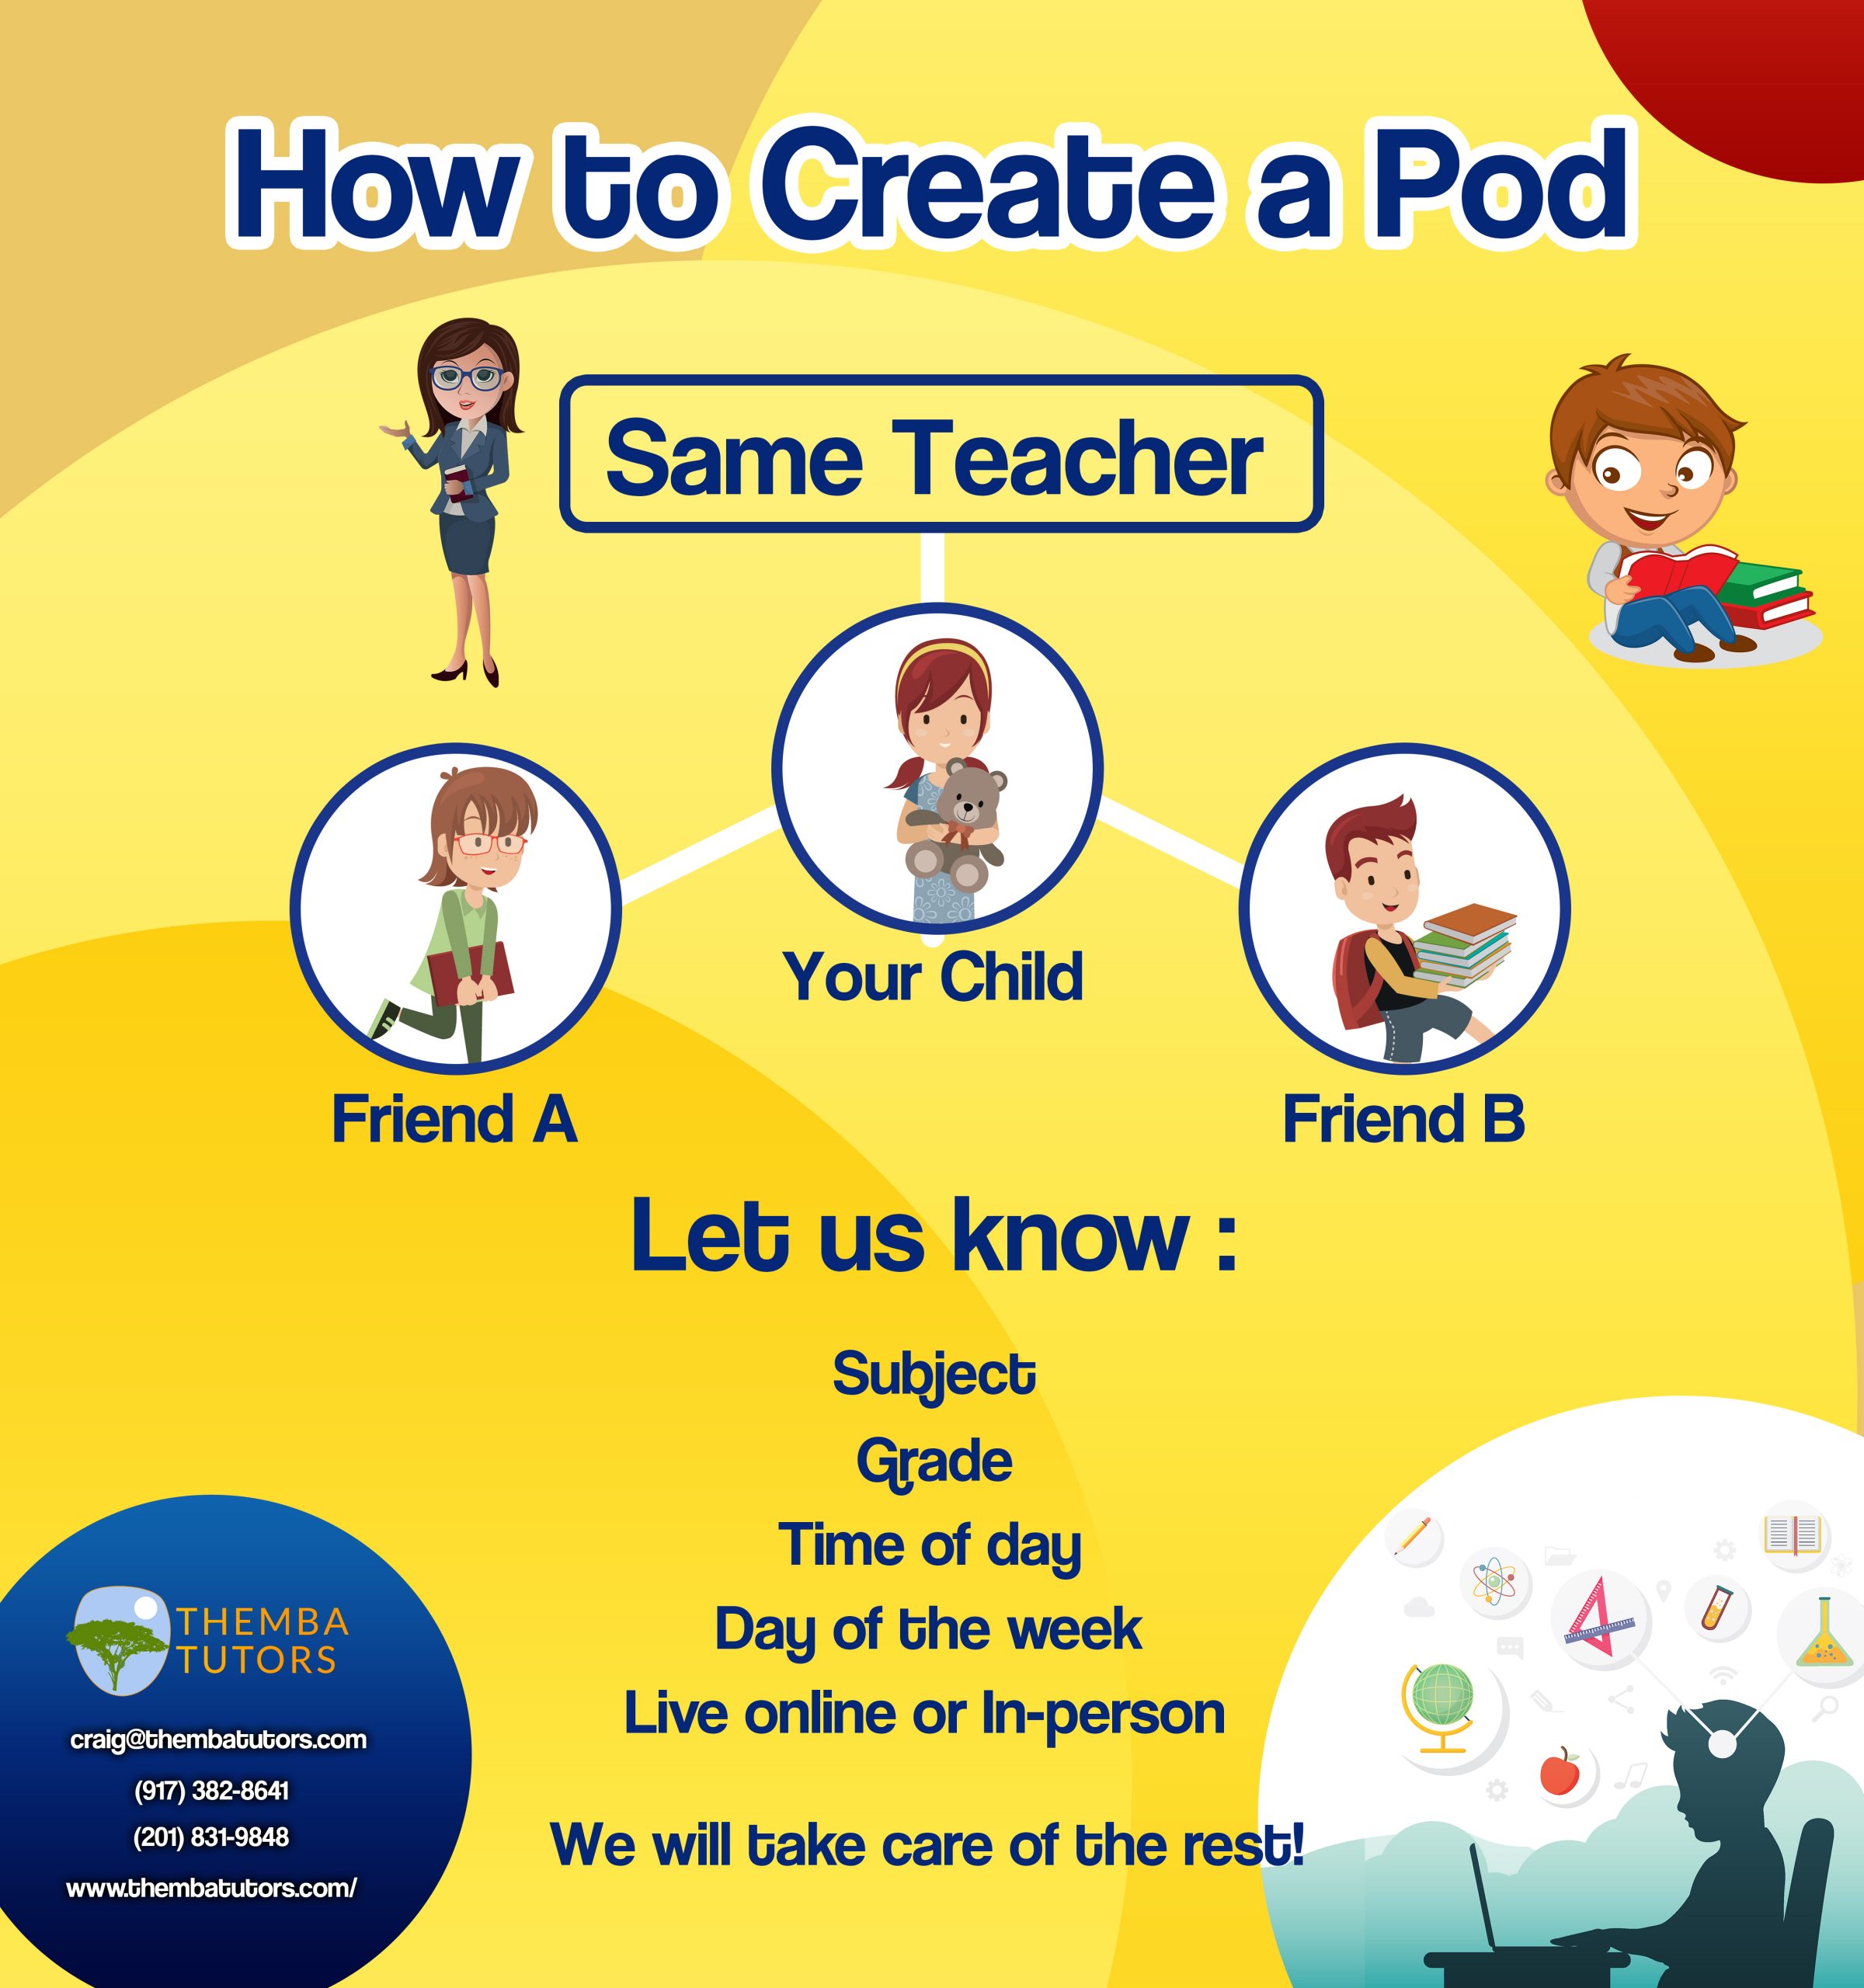 How to Create Pod Themba